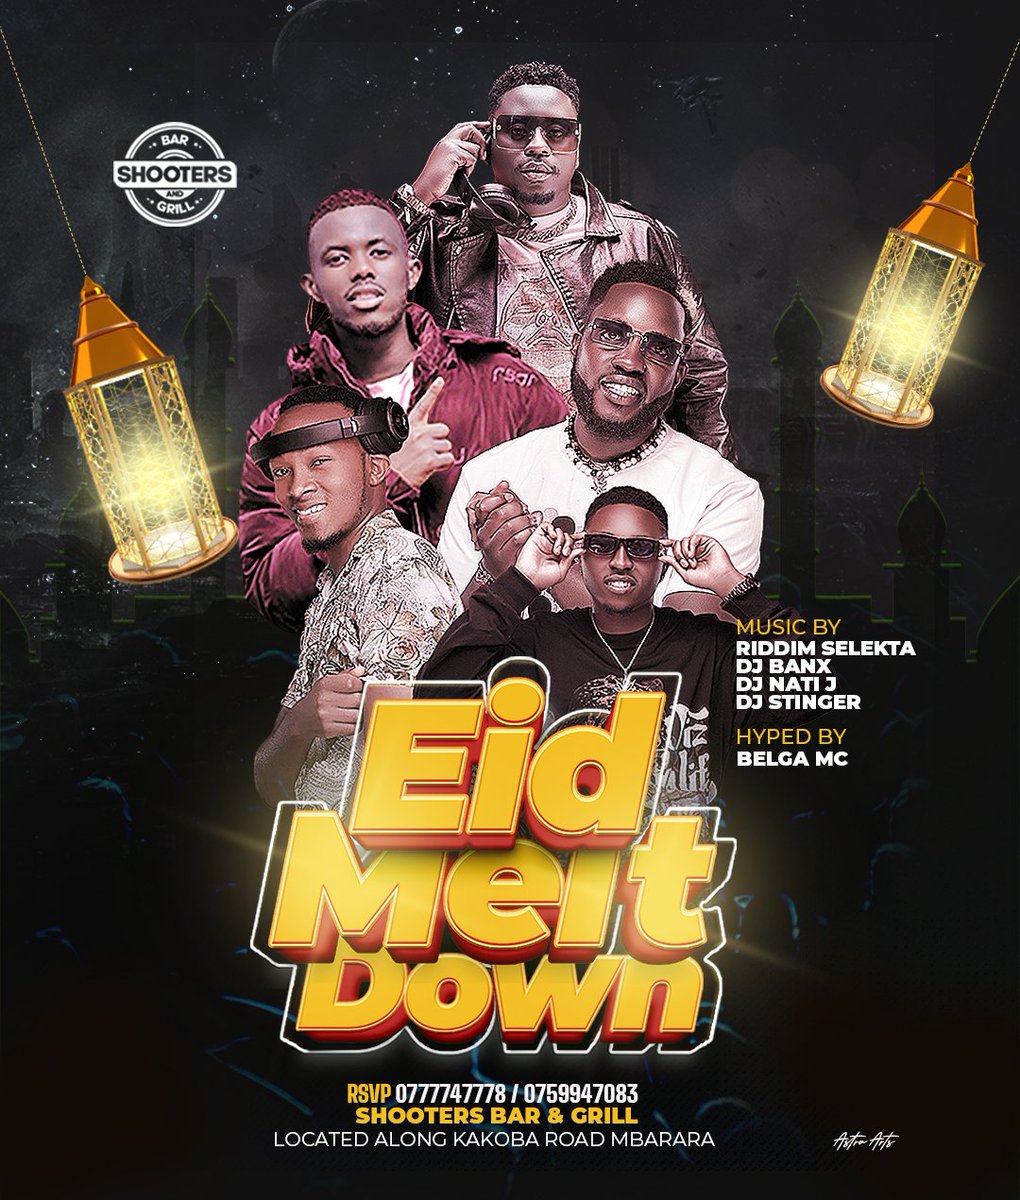 After Eating the pilau we shall party till the weekend pops in 
    
      📌 @ShootersBar_Mbr #EidMeltDown    __